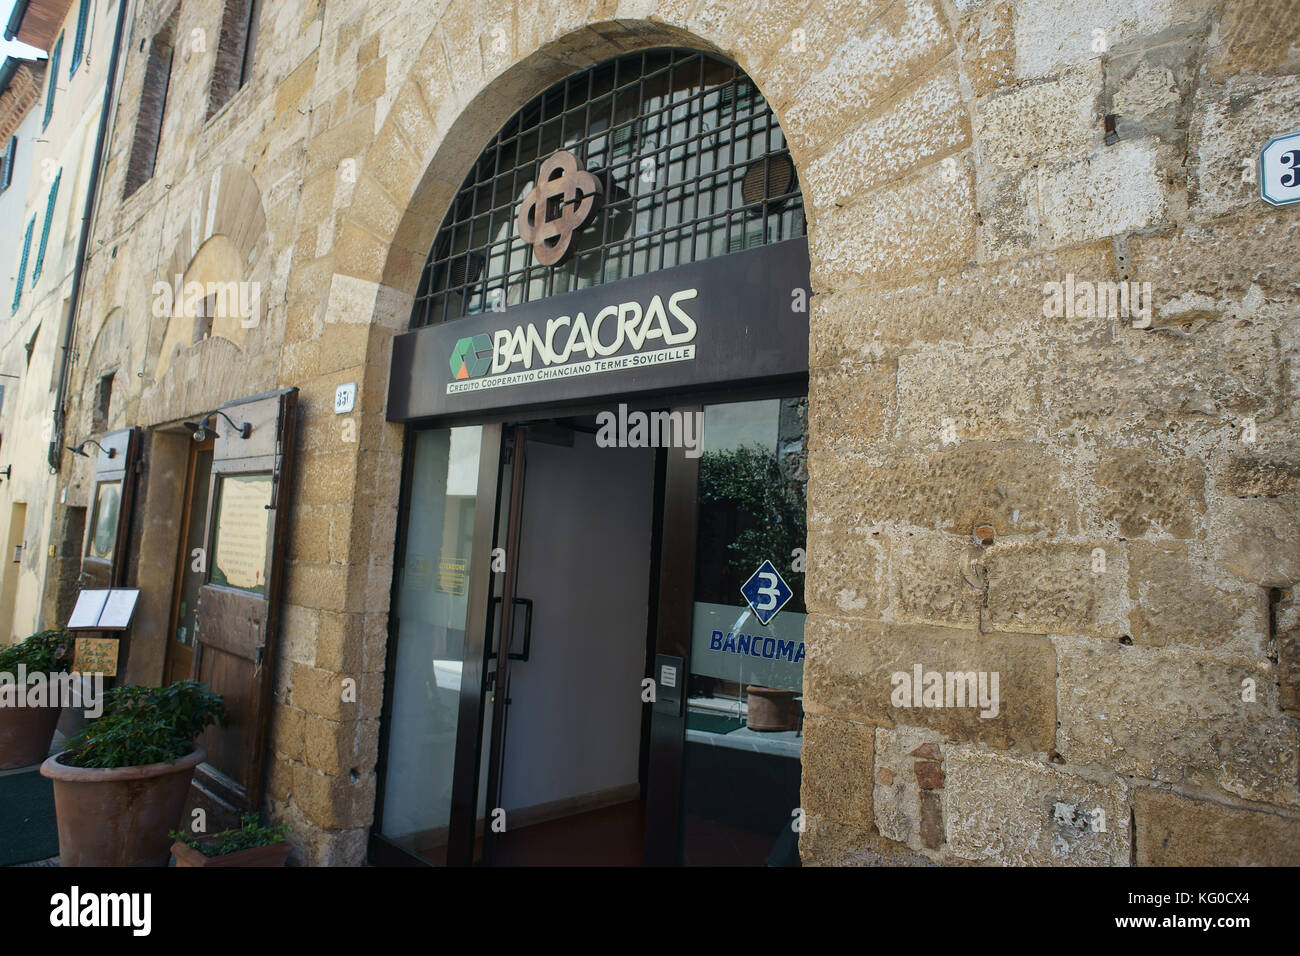 Banca Toscana Italie italien bancaire banques banque branche branches  highstreet high street Photo Stock - Alamy